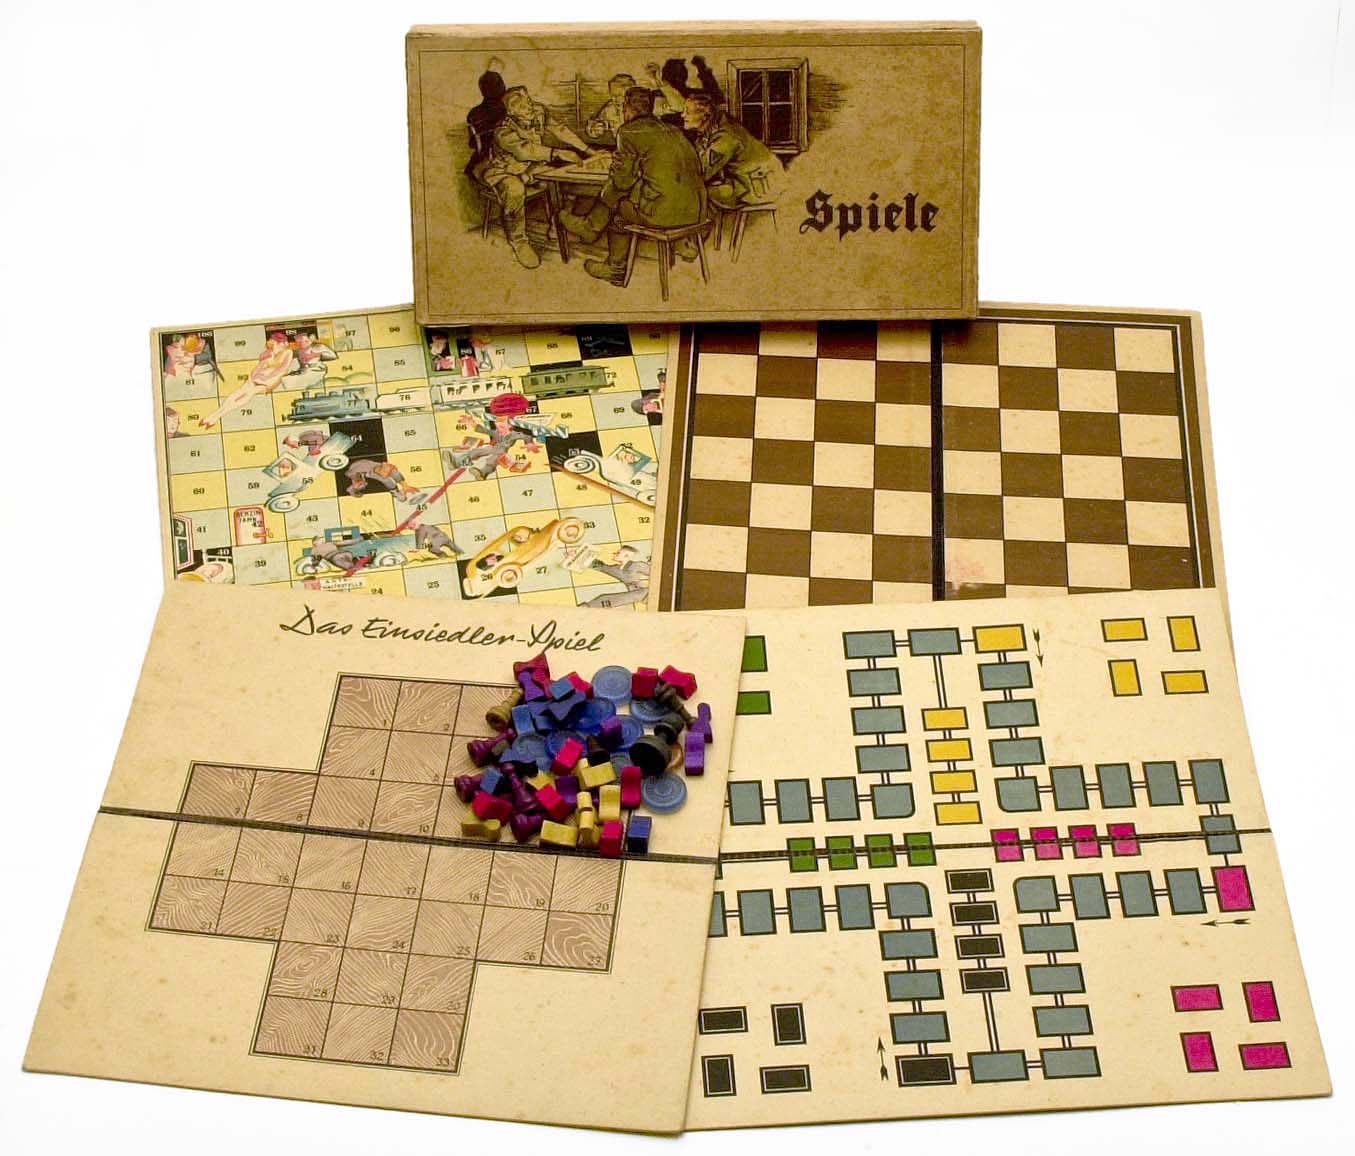 Spiele (Soldier’s board games collection for Eastern front)